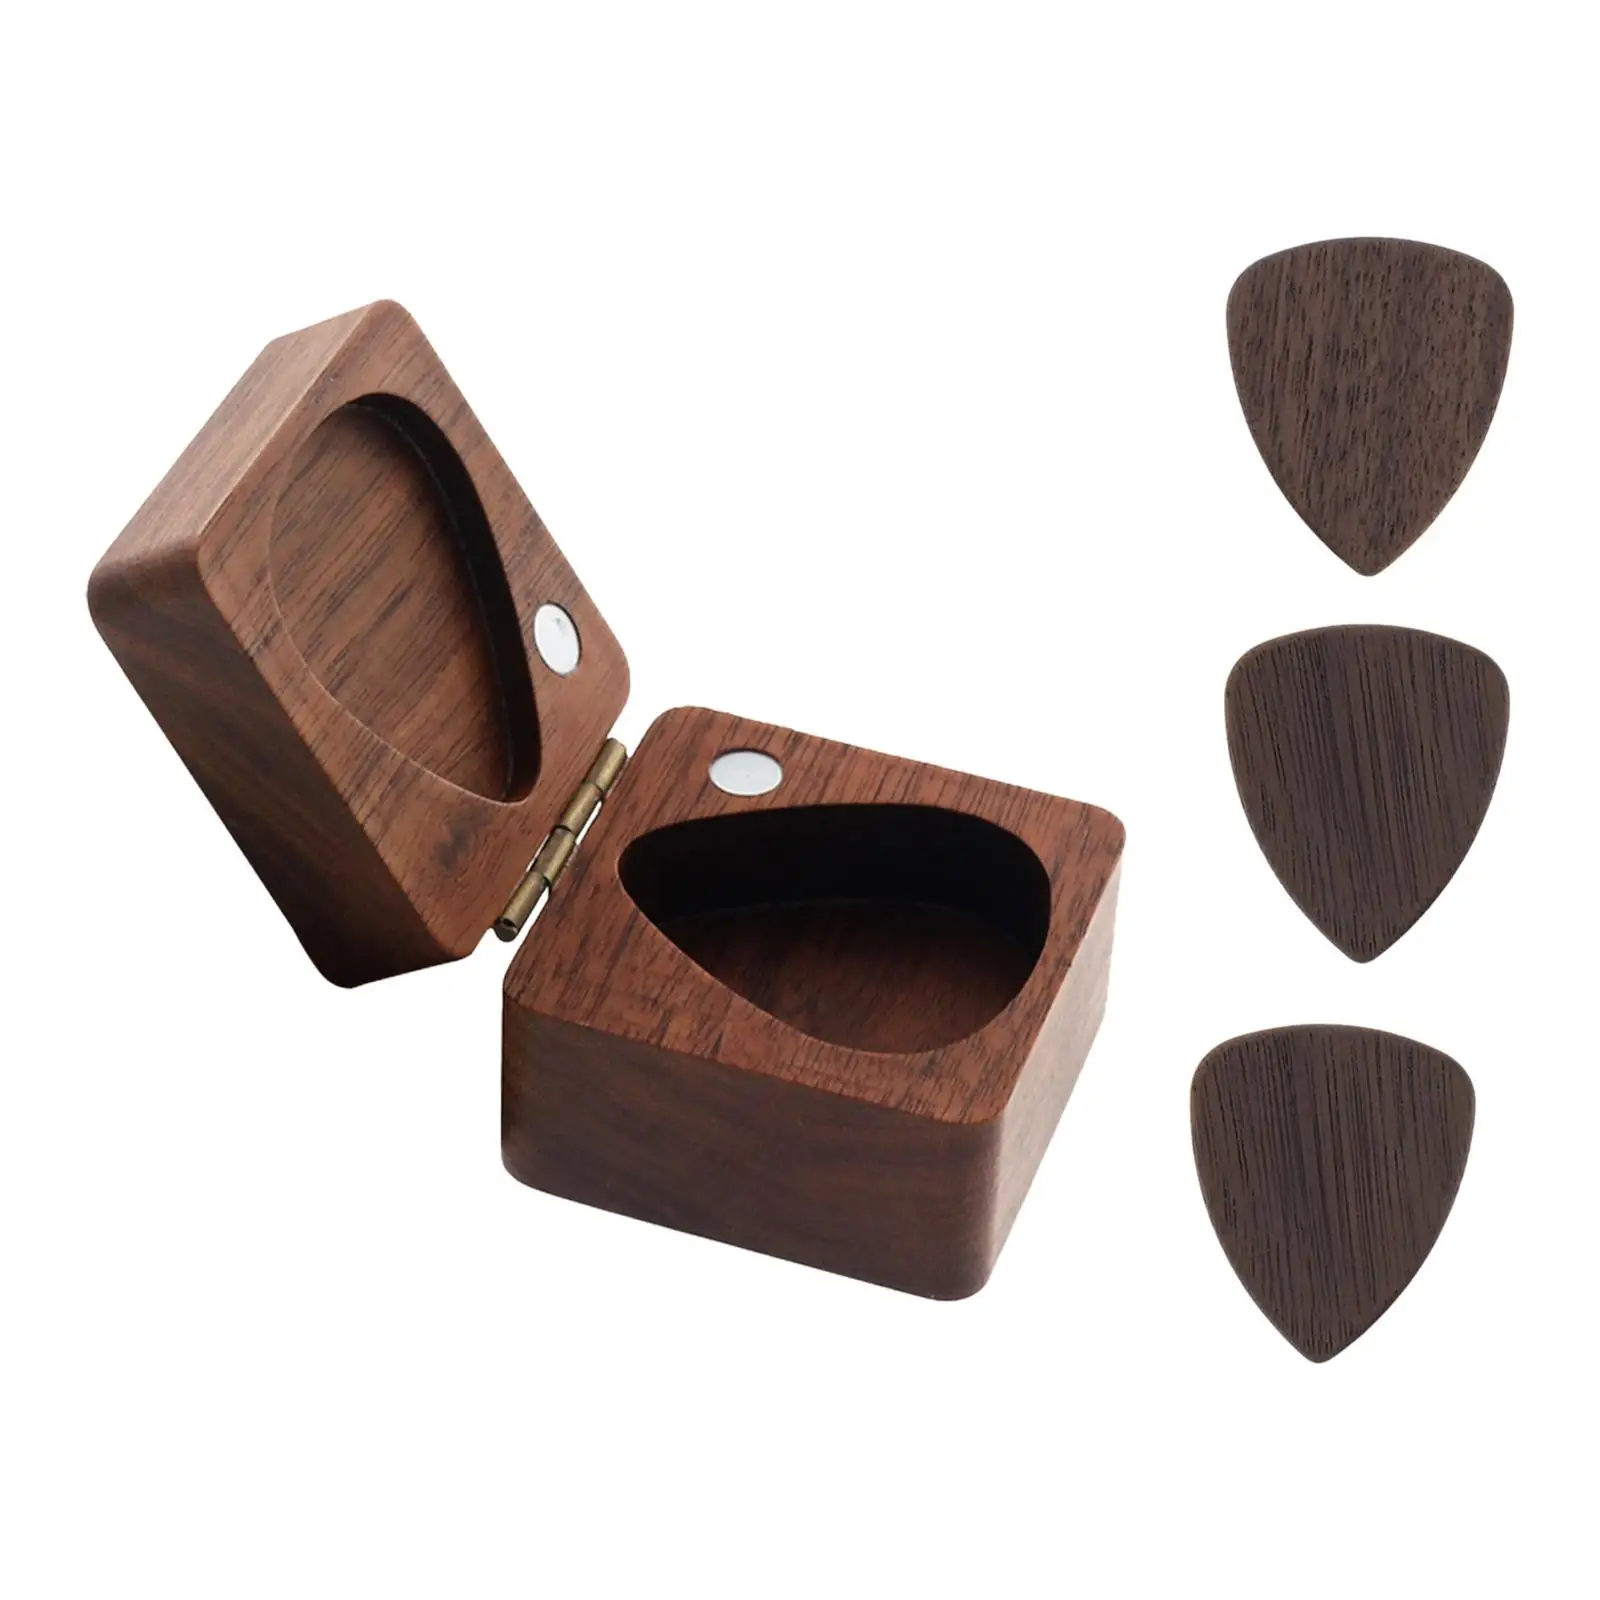 Wooden Guitar Picks Case Collections Durable Handmade with 3 Guitar Picks for Guitarist Musician Gift Guitar Pick Holder